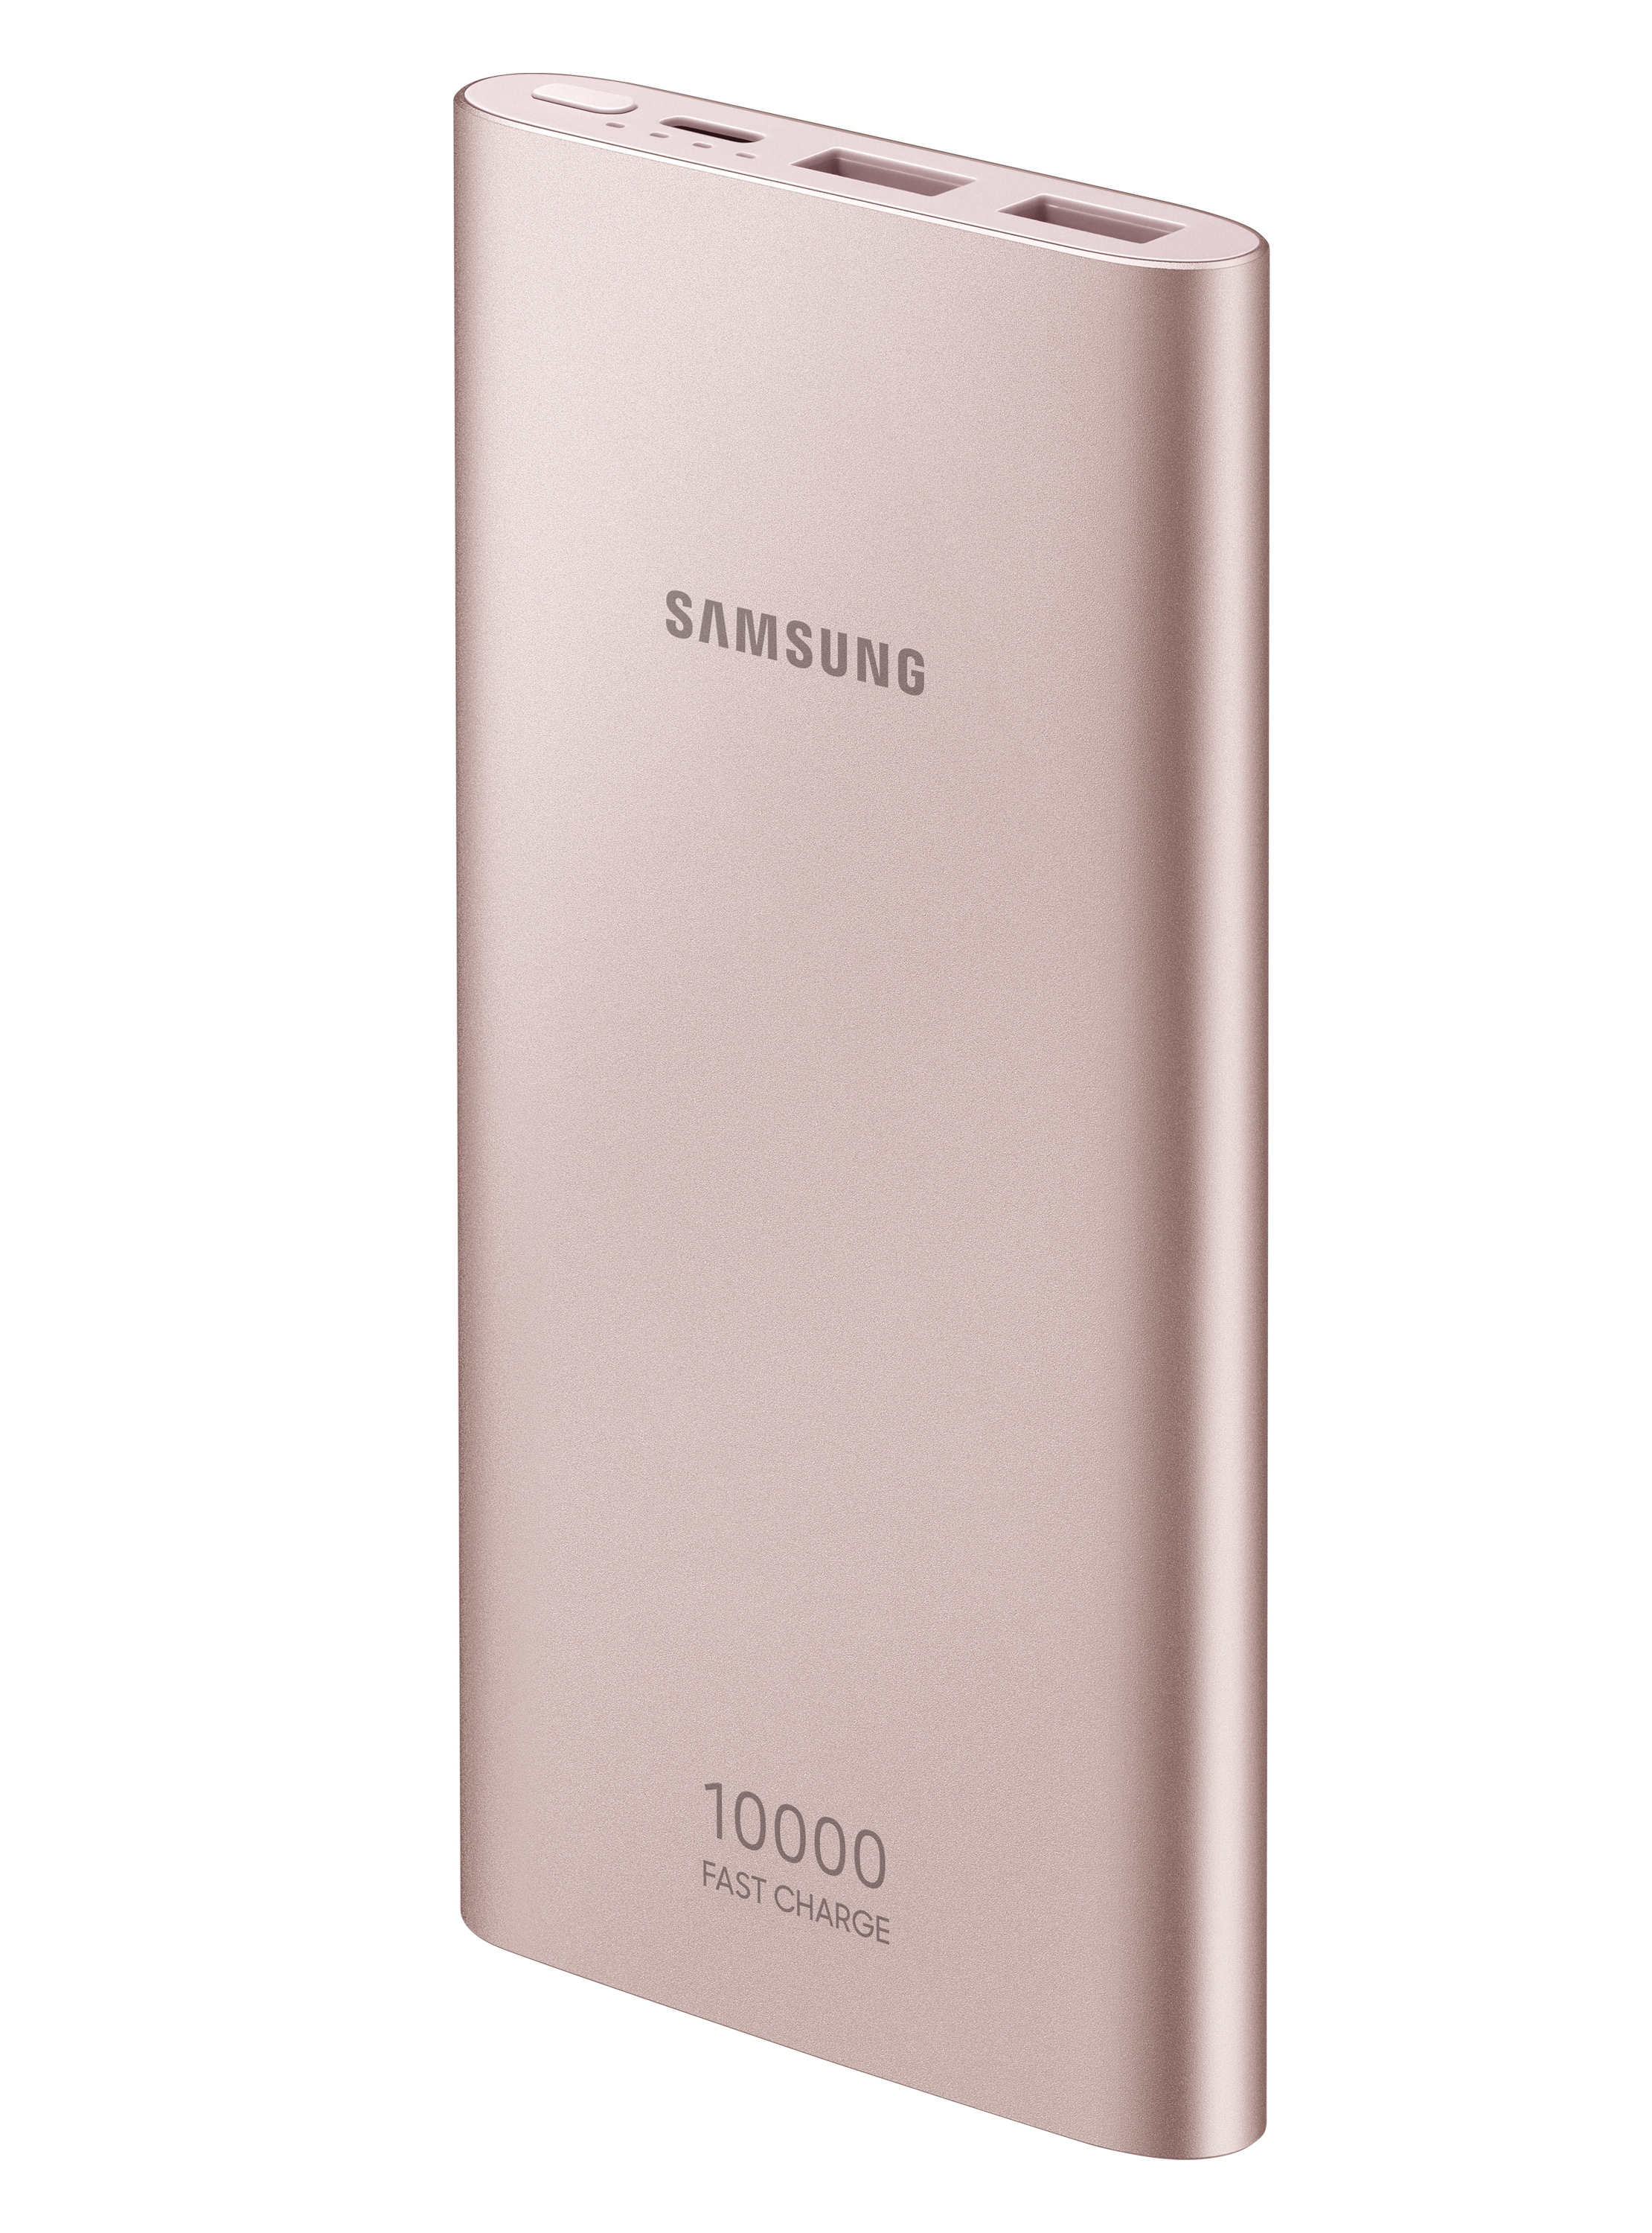 Thumbnail image of 10,000 mAh Portable Battery with USB-C Cable, Pink